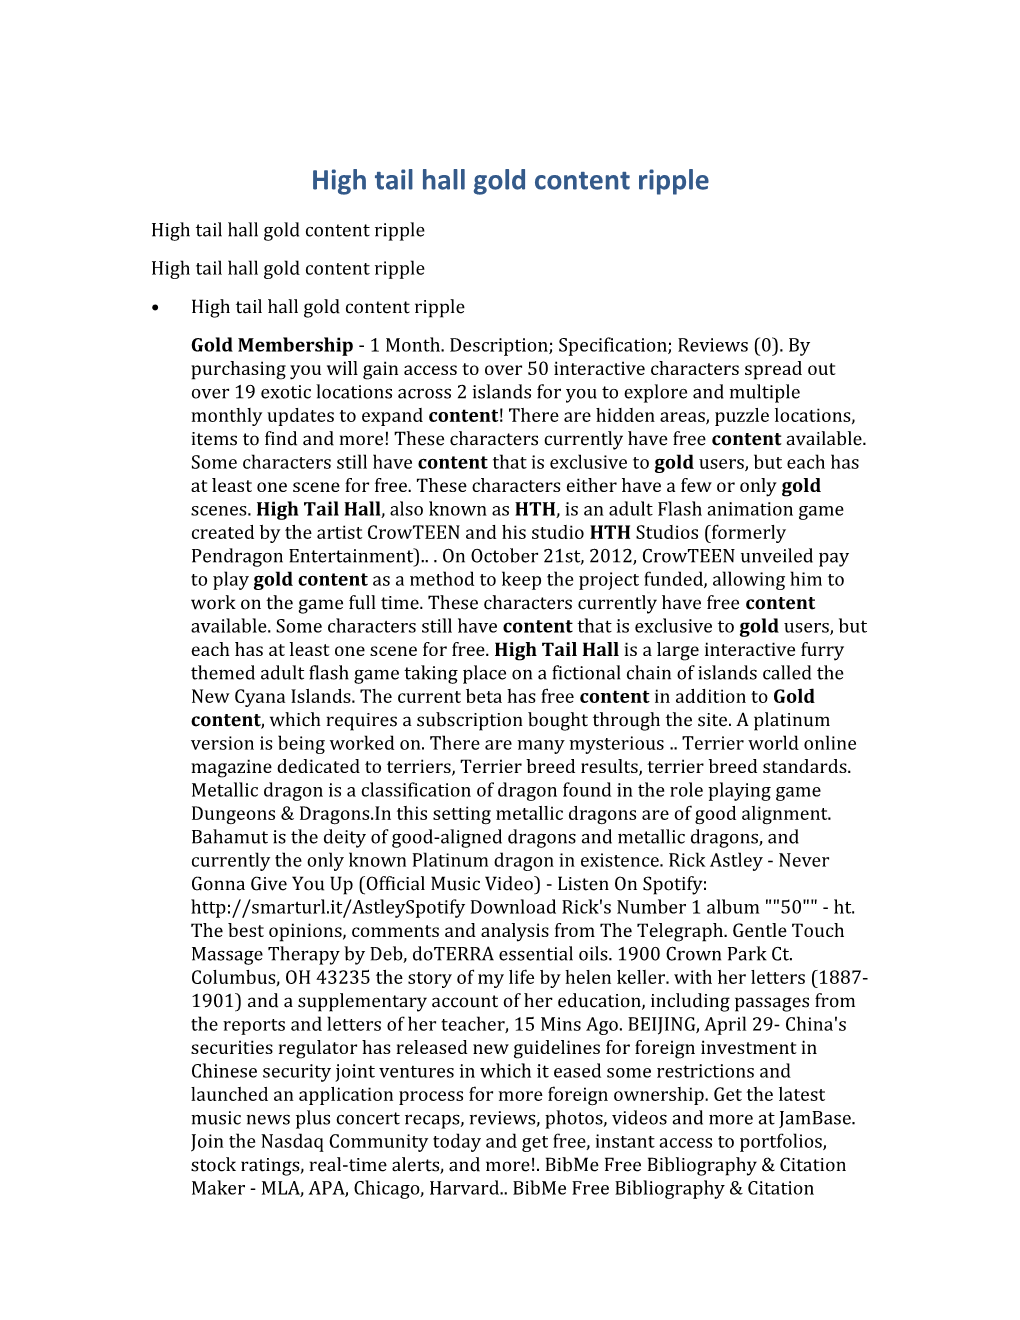 High Tail Hall Gold Content Ripple